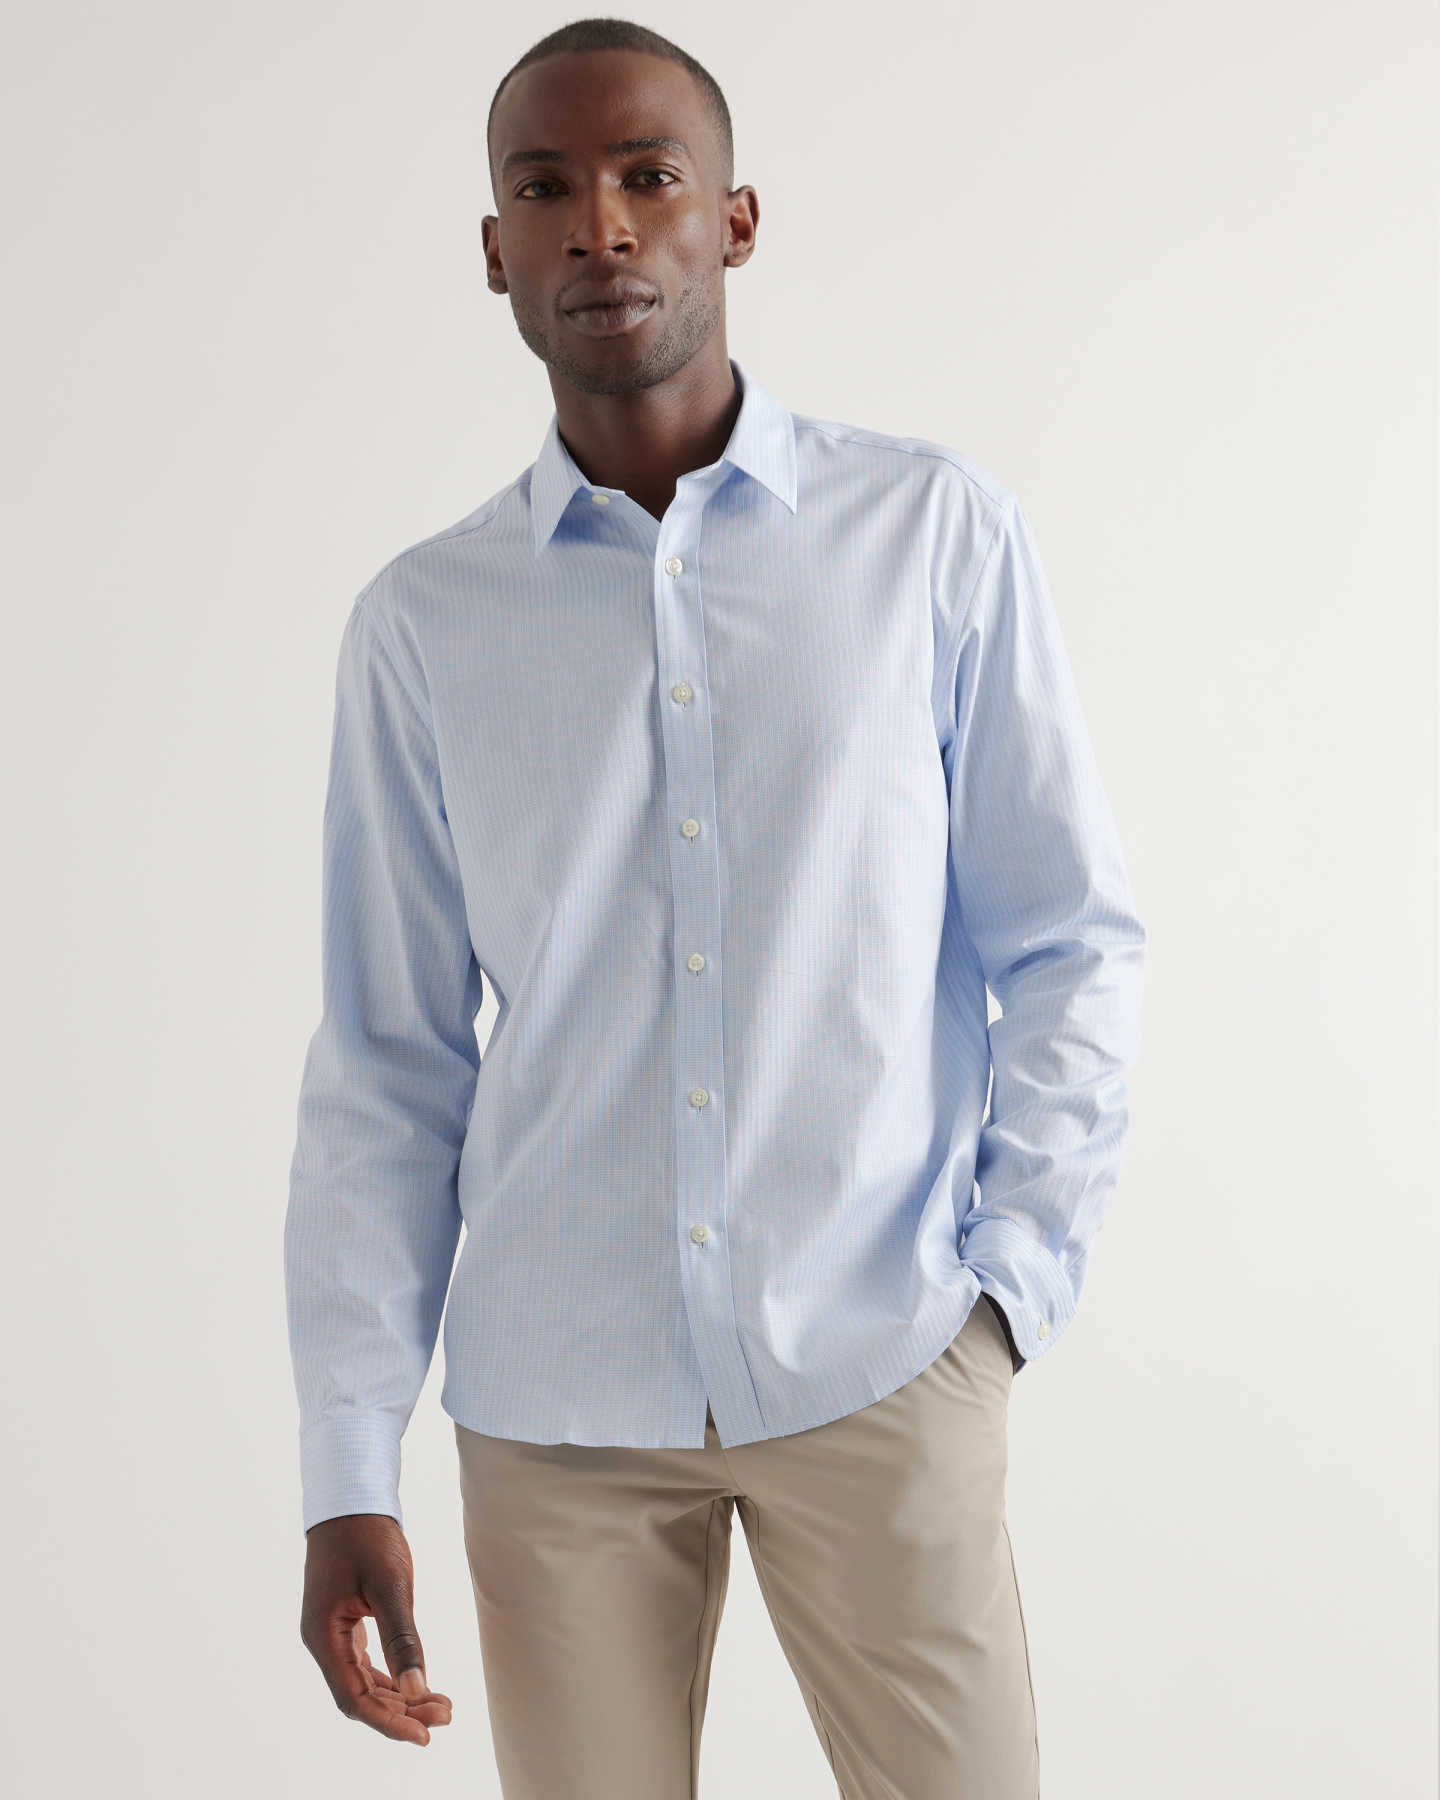 The Untucked Dress Shirt - Blue Patterned Stripes - 18